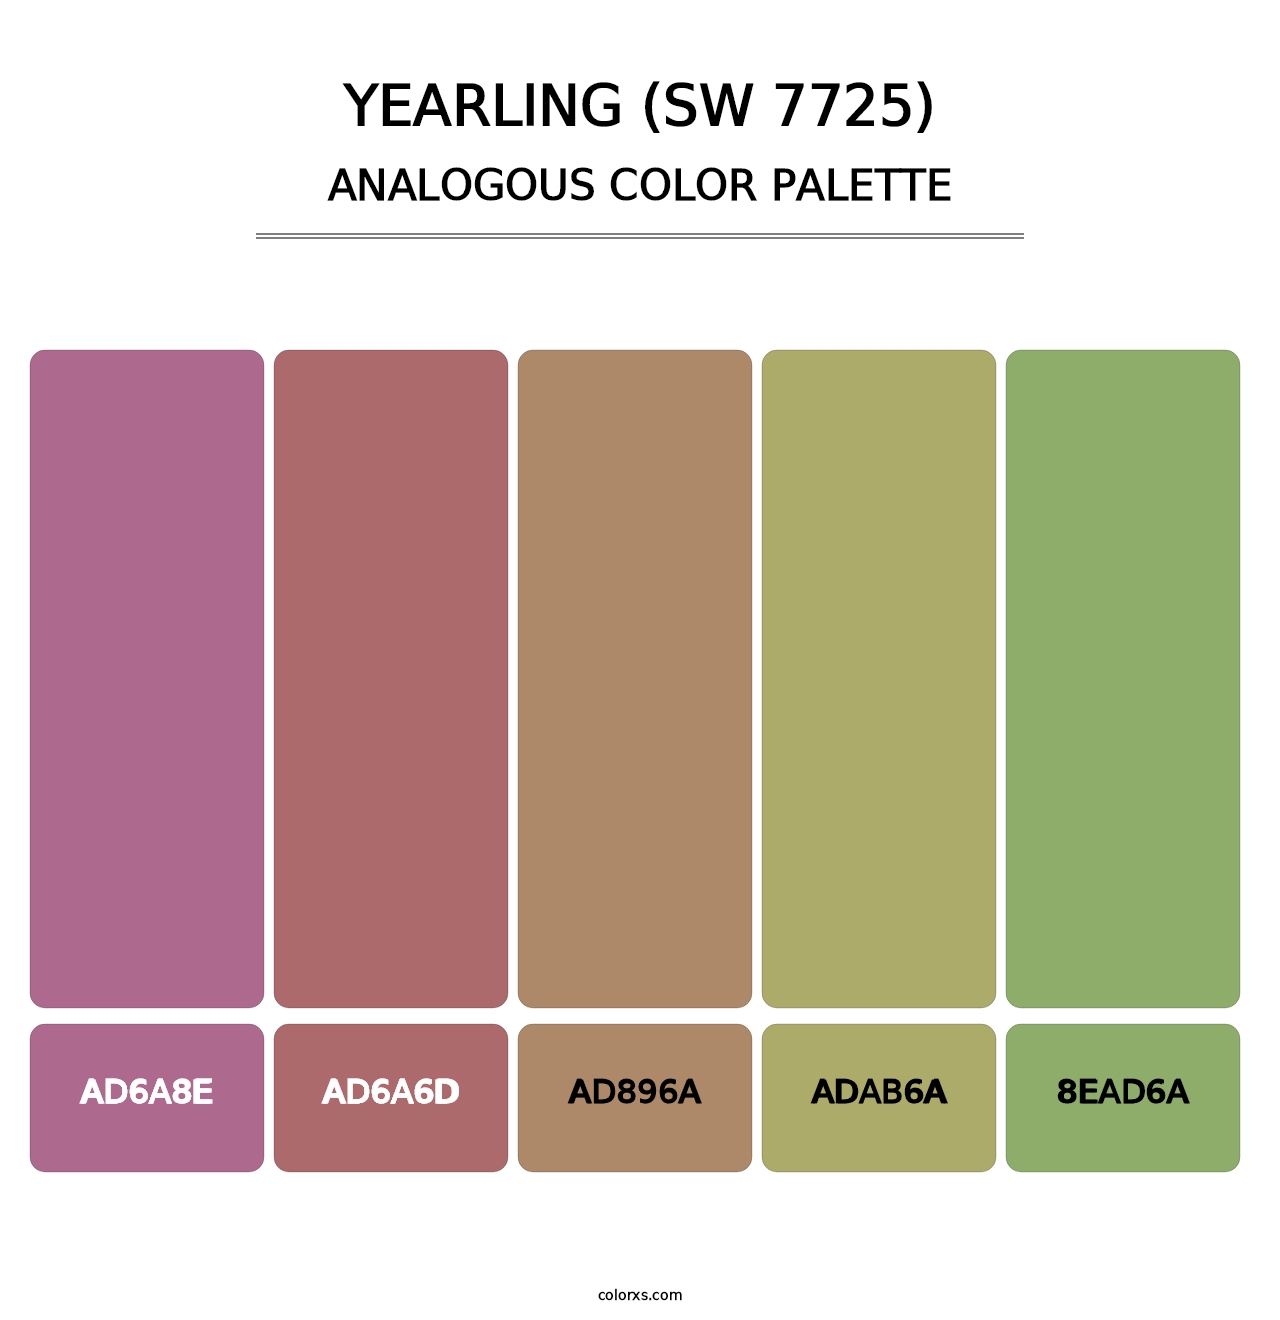 Yearling (SW 7725) - Analogous Color Palette